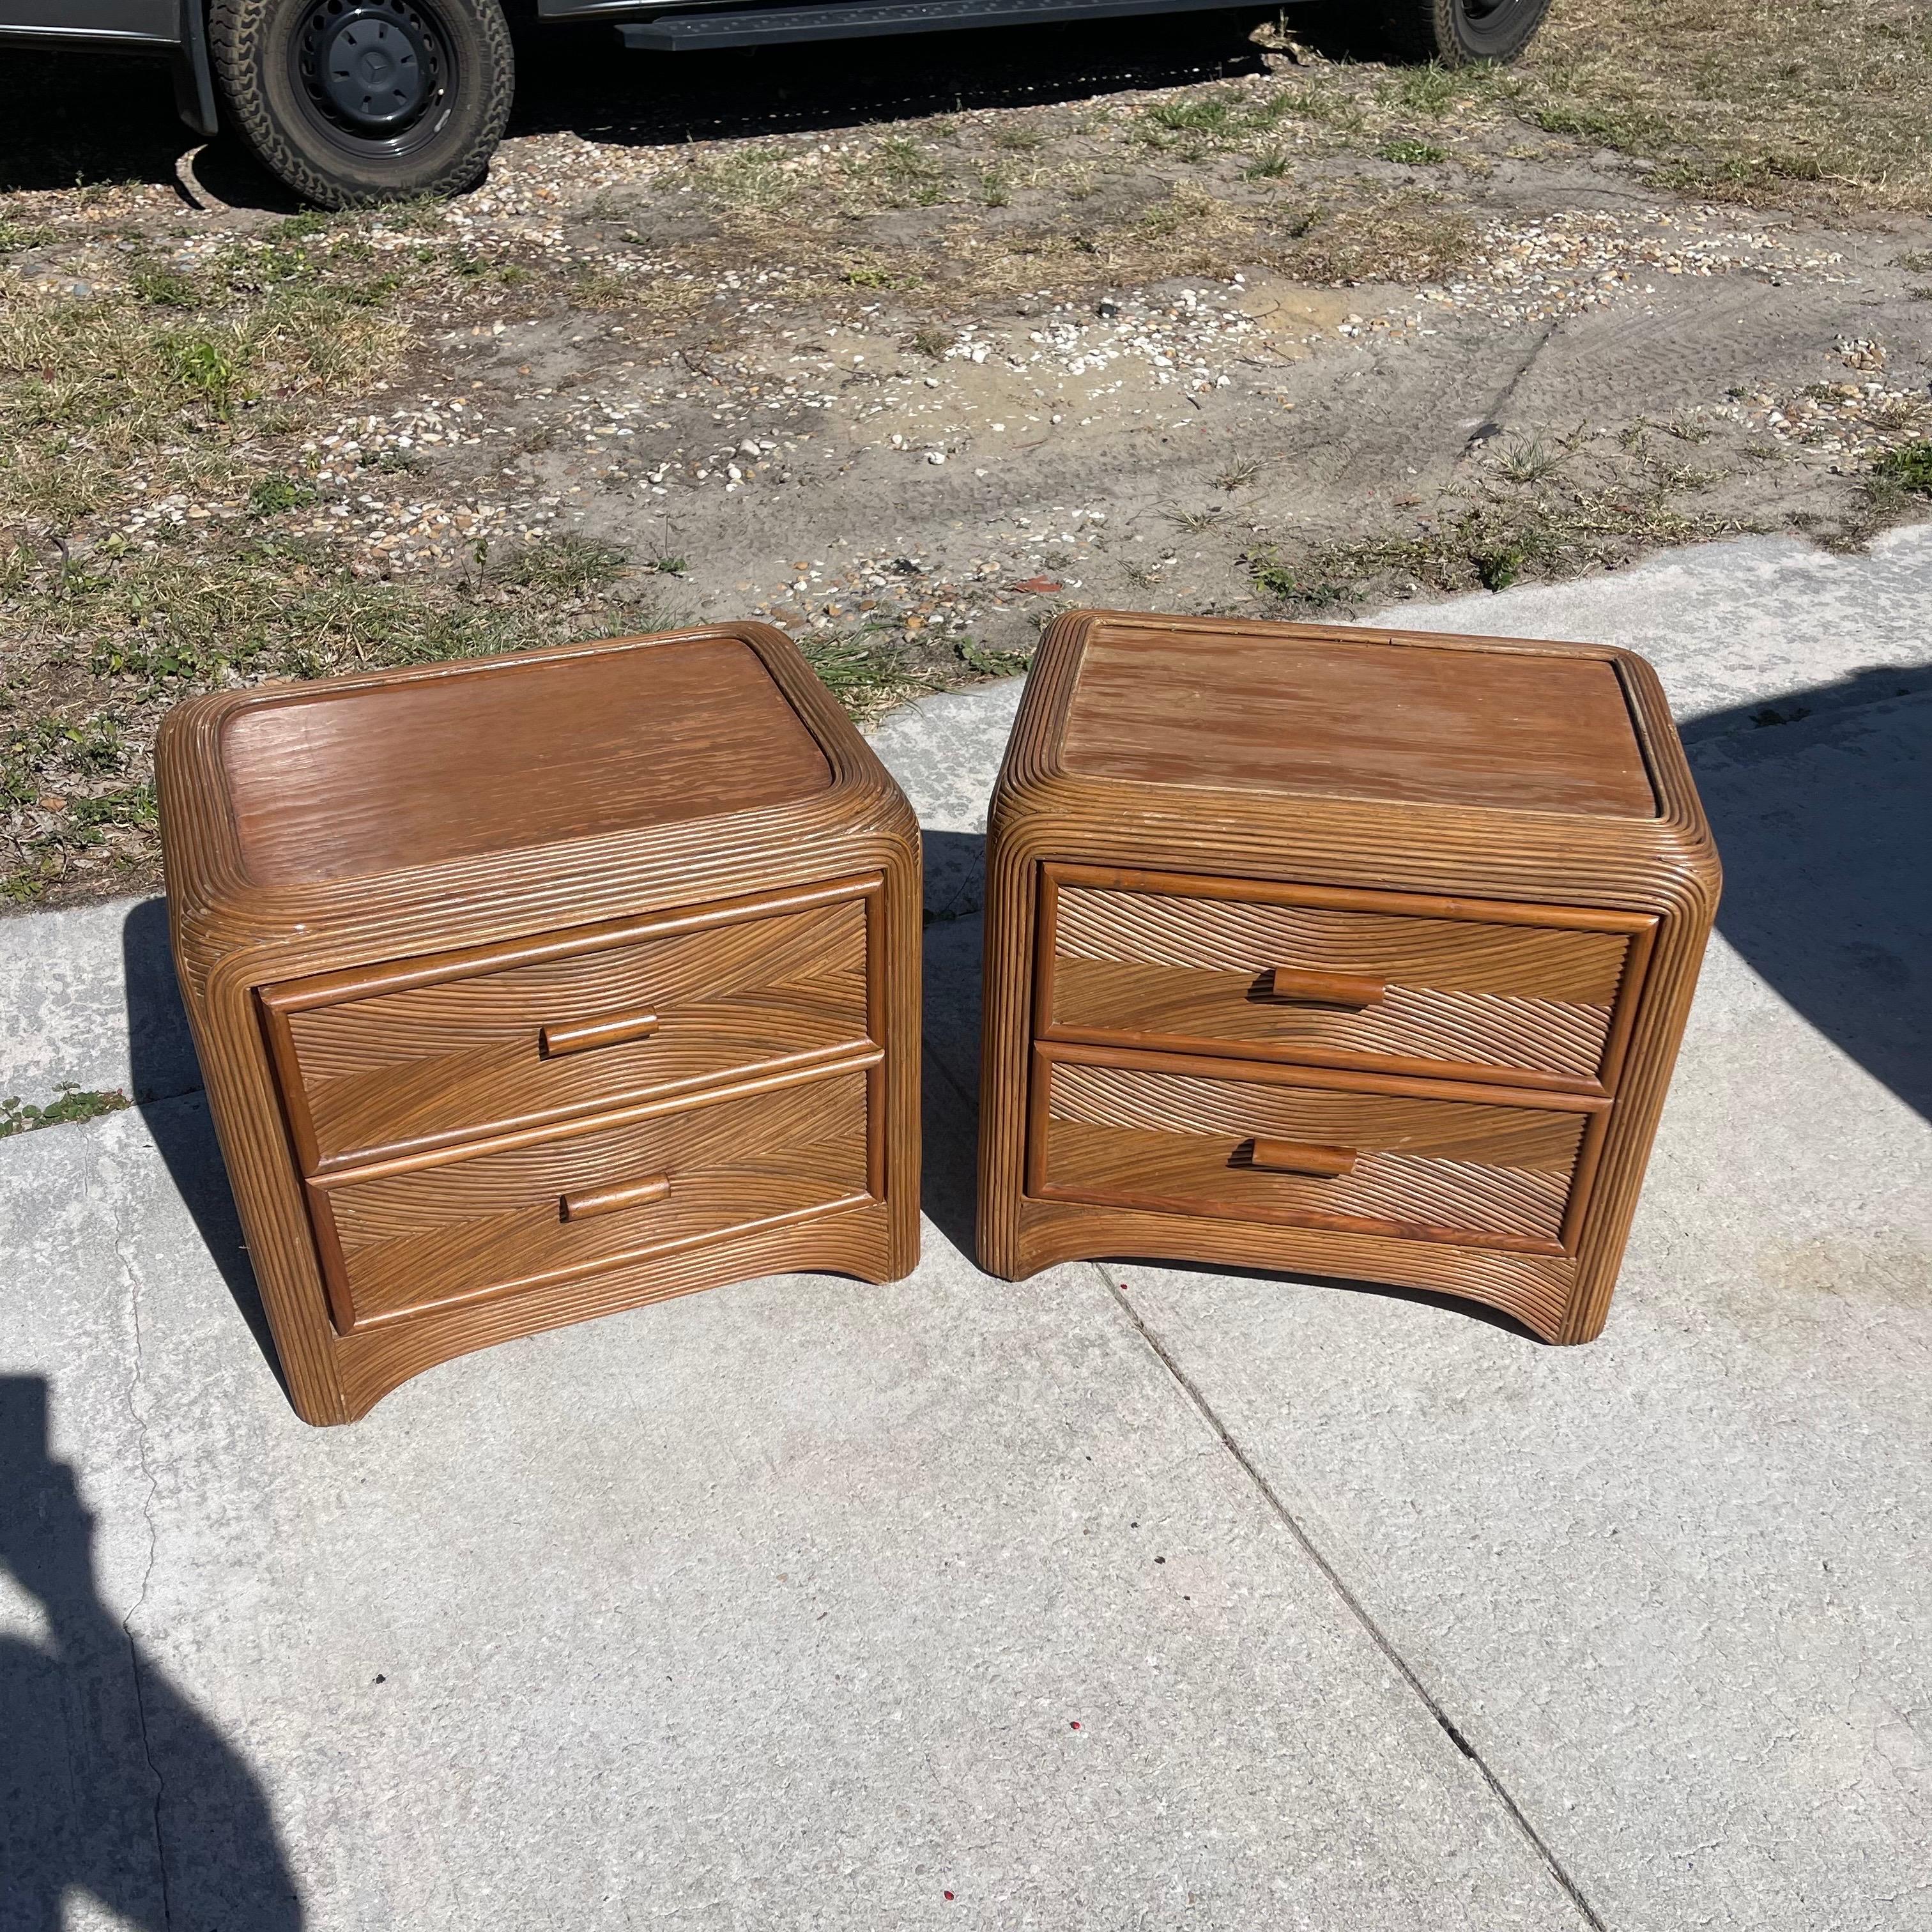 Fabulous pair of vintage pencil reed nightstands, each with 2 drawers.